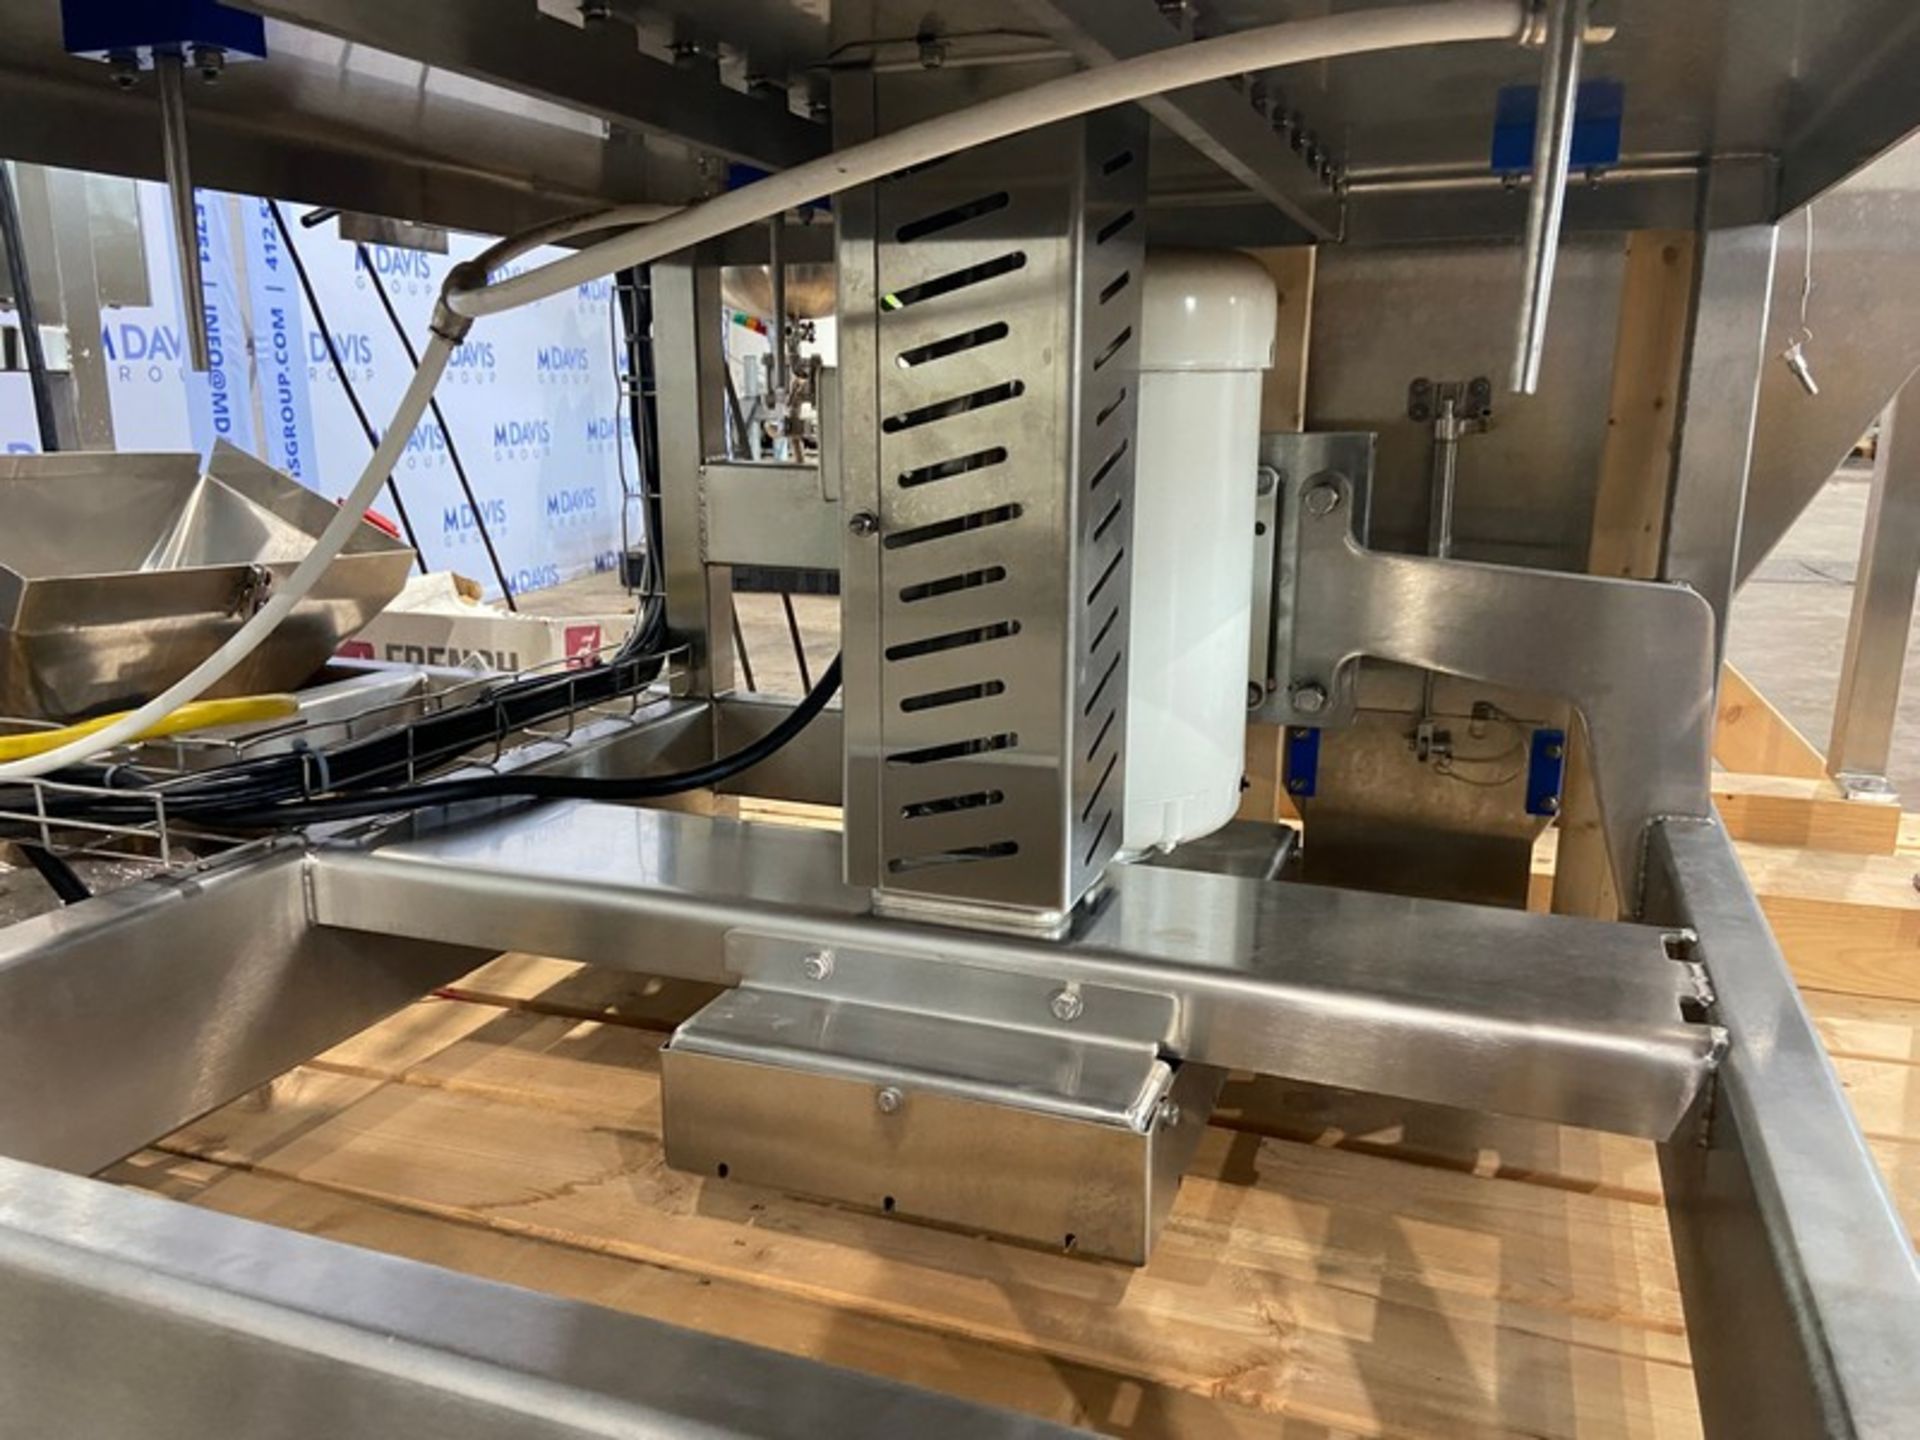 2018 Spray Dynamics Centrifugal Coater, S/N 2018018444, 480 Volts, 3 Phase, with Allen-Bradley - Image 10 of 15